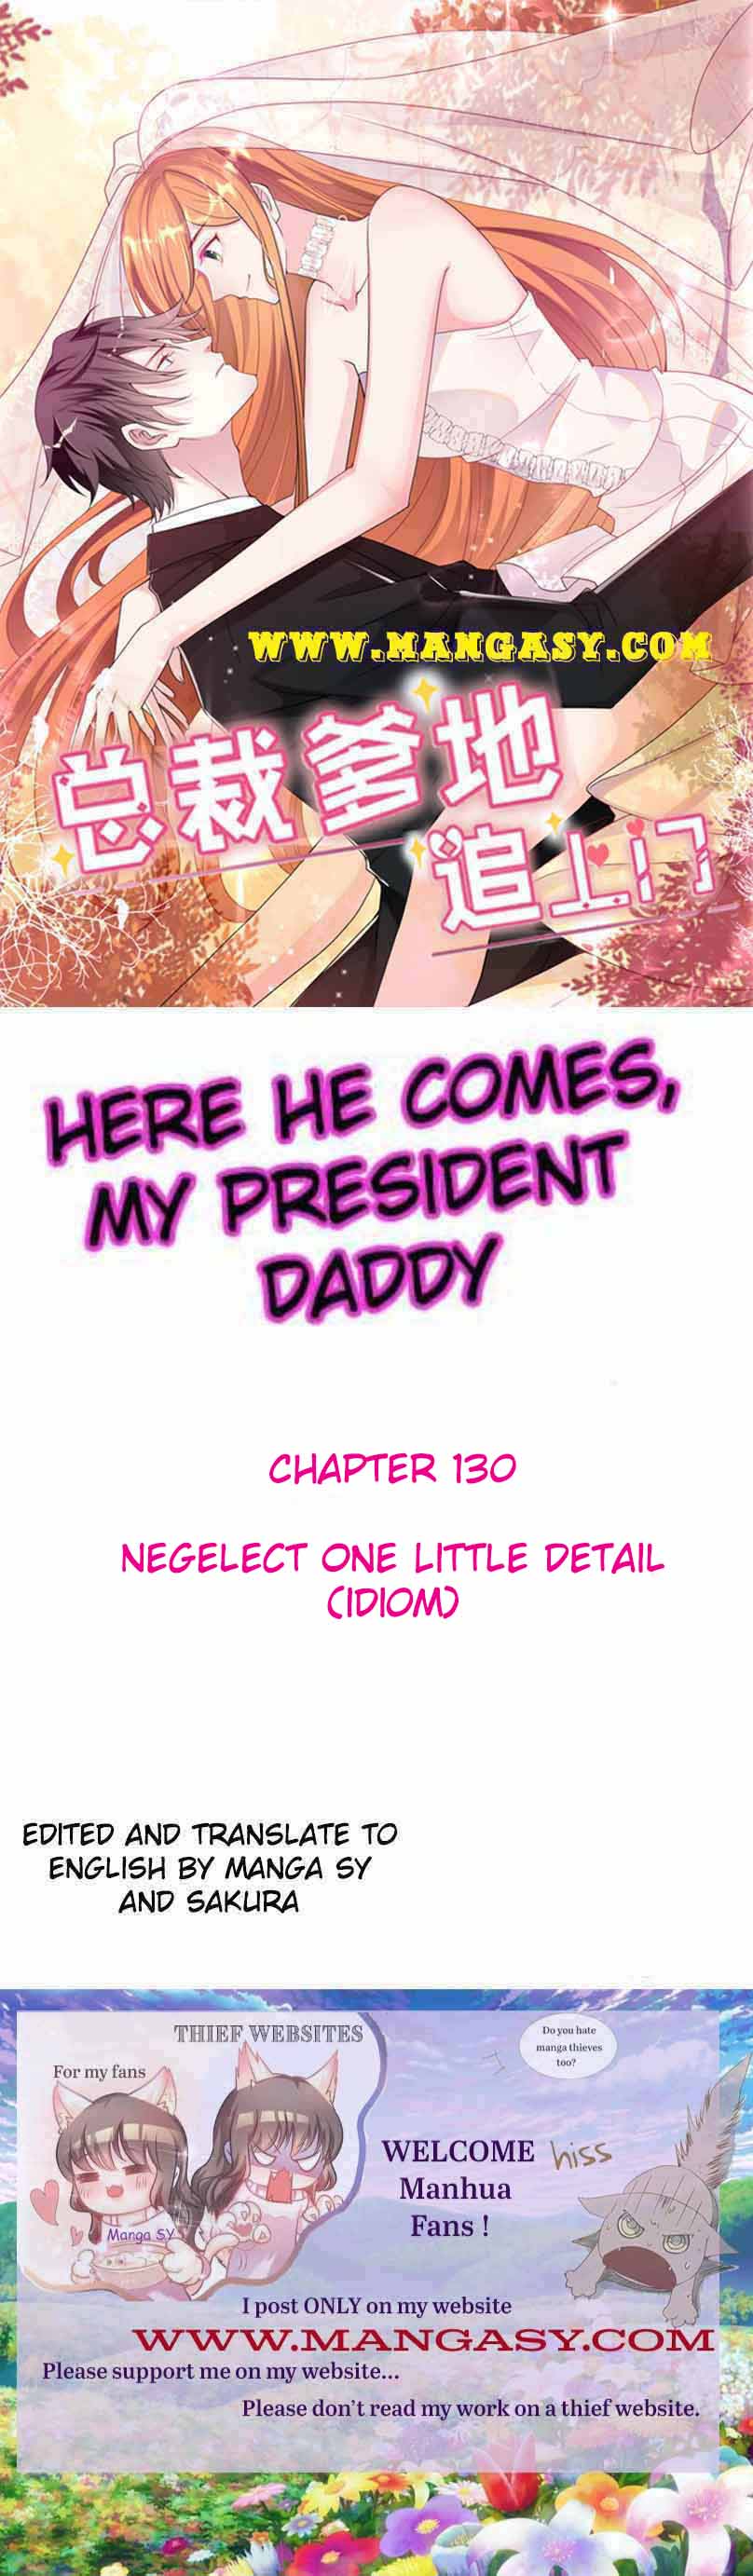 President Daddy Is Chasing You - 130 page 1-fa69b446